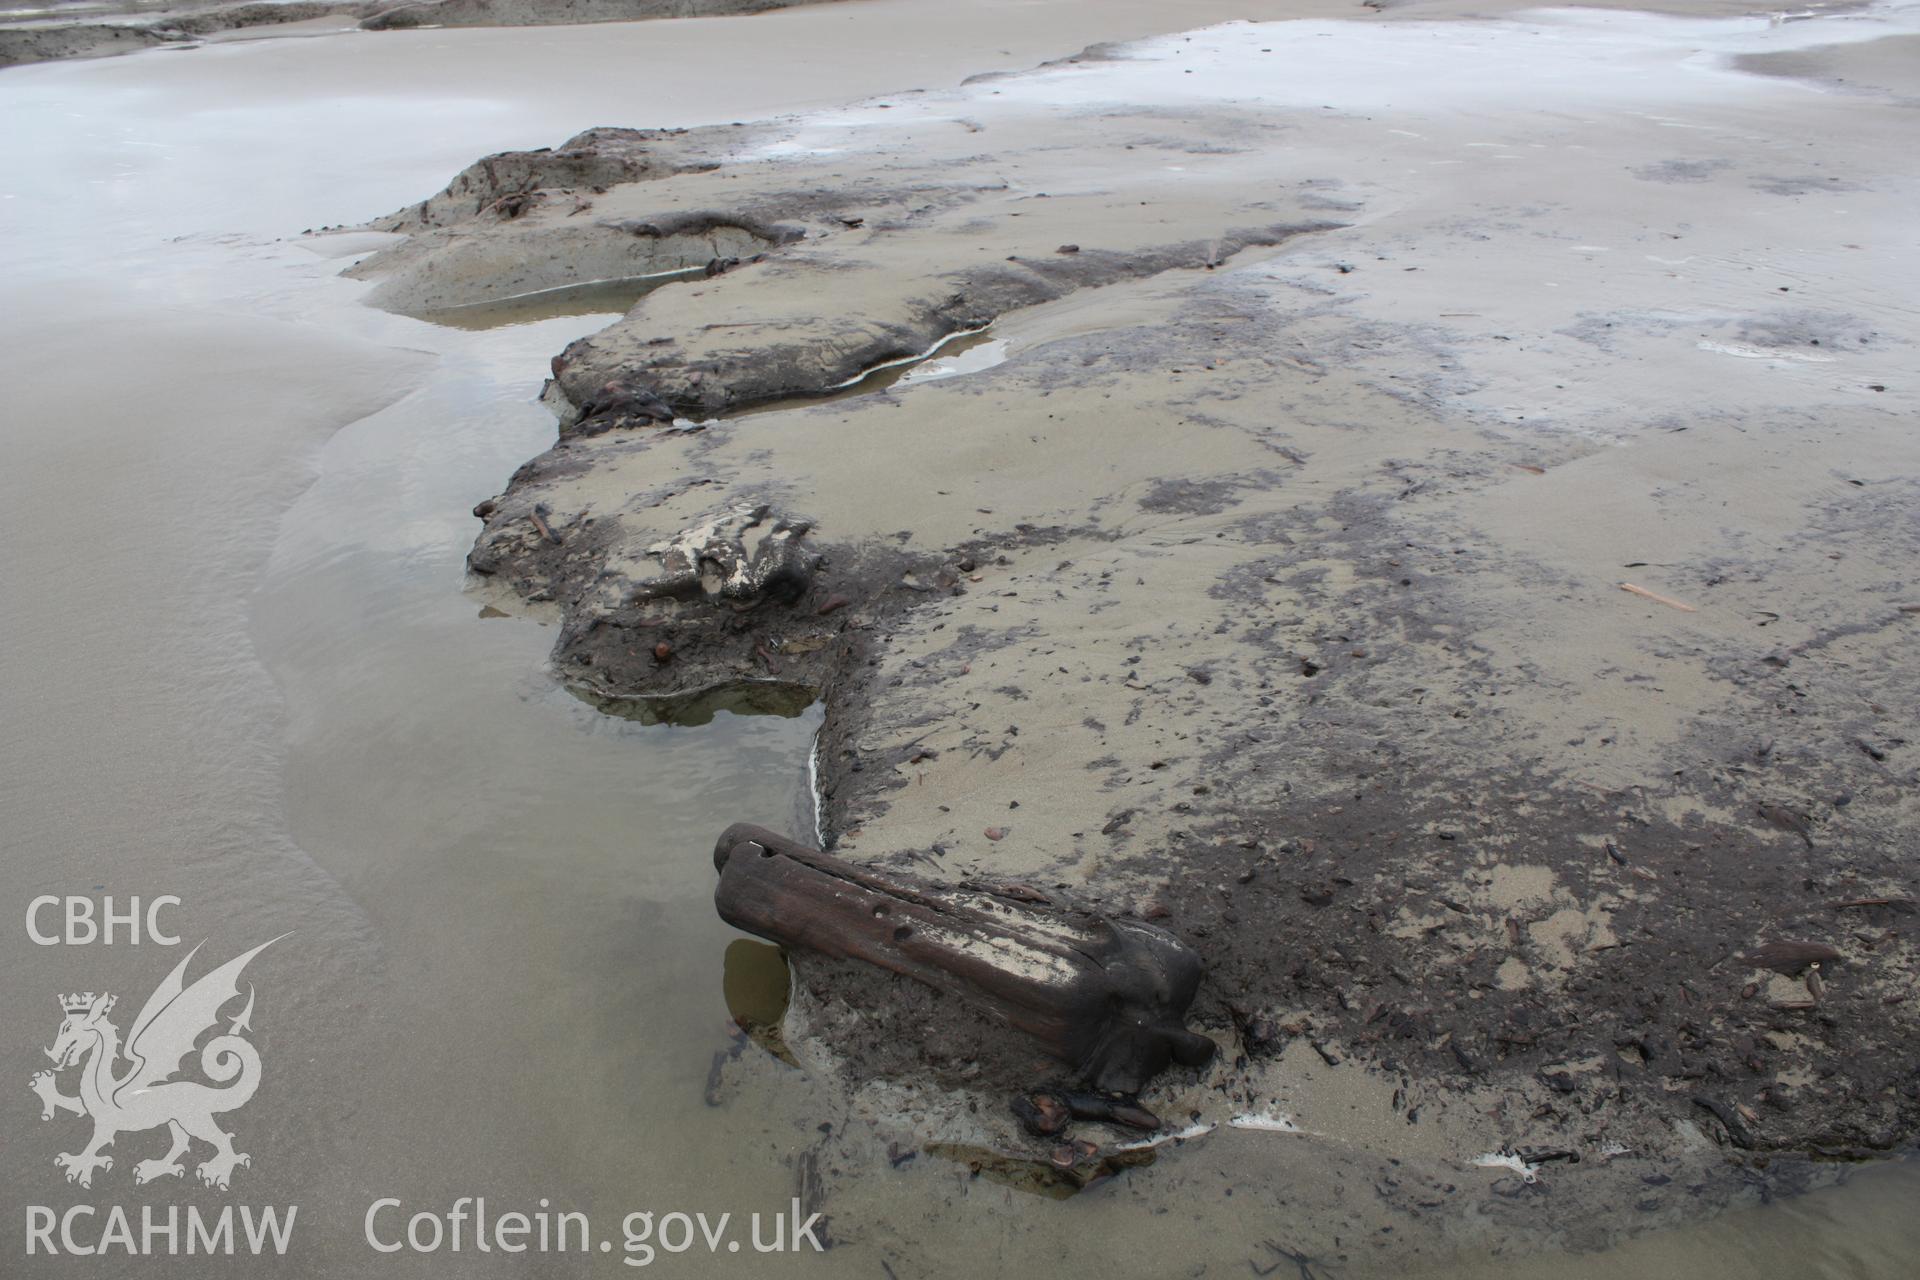 Borth submerged forest (between RNLI lifeboat station and upper Borth), looking north towards Ynyslas. Close-up of peat exposure with preserved tree remains